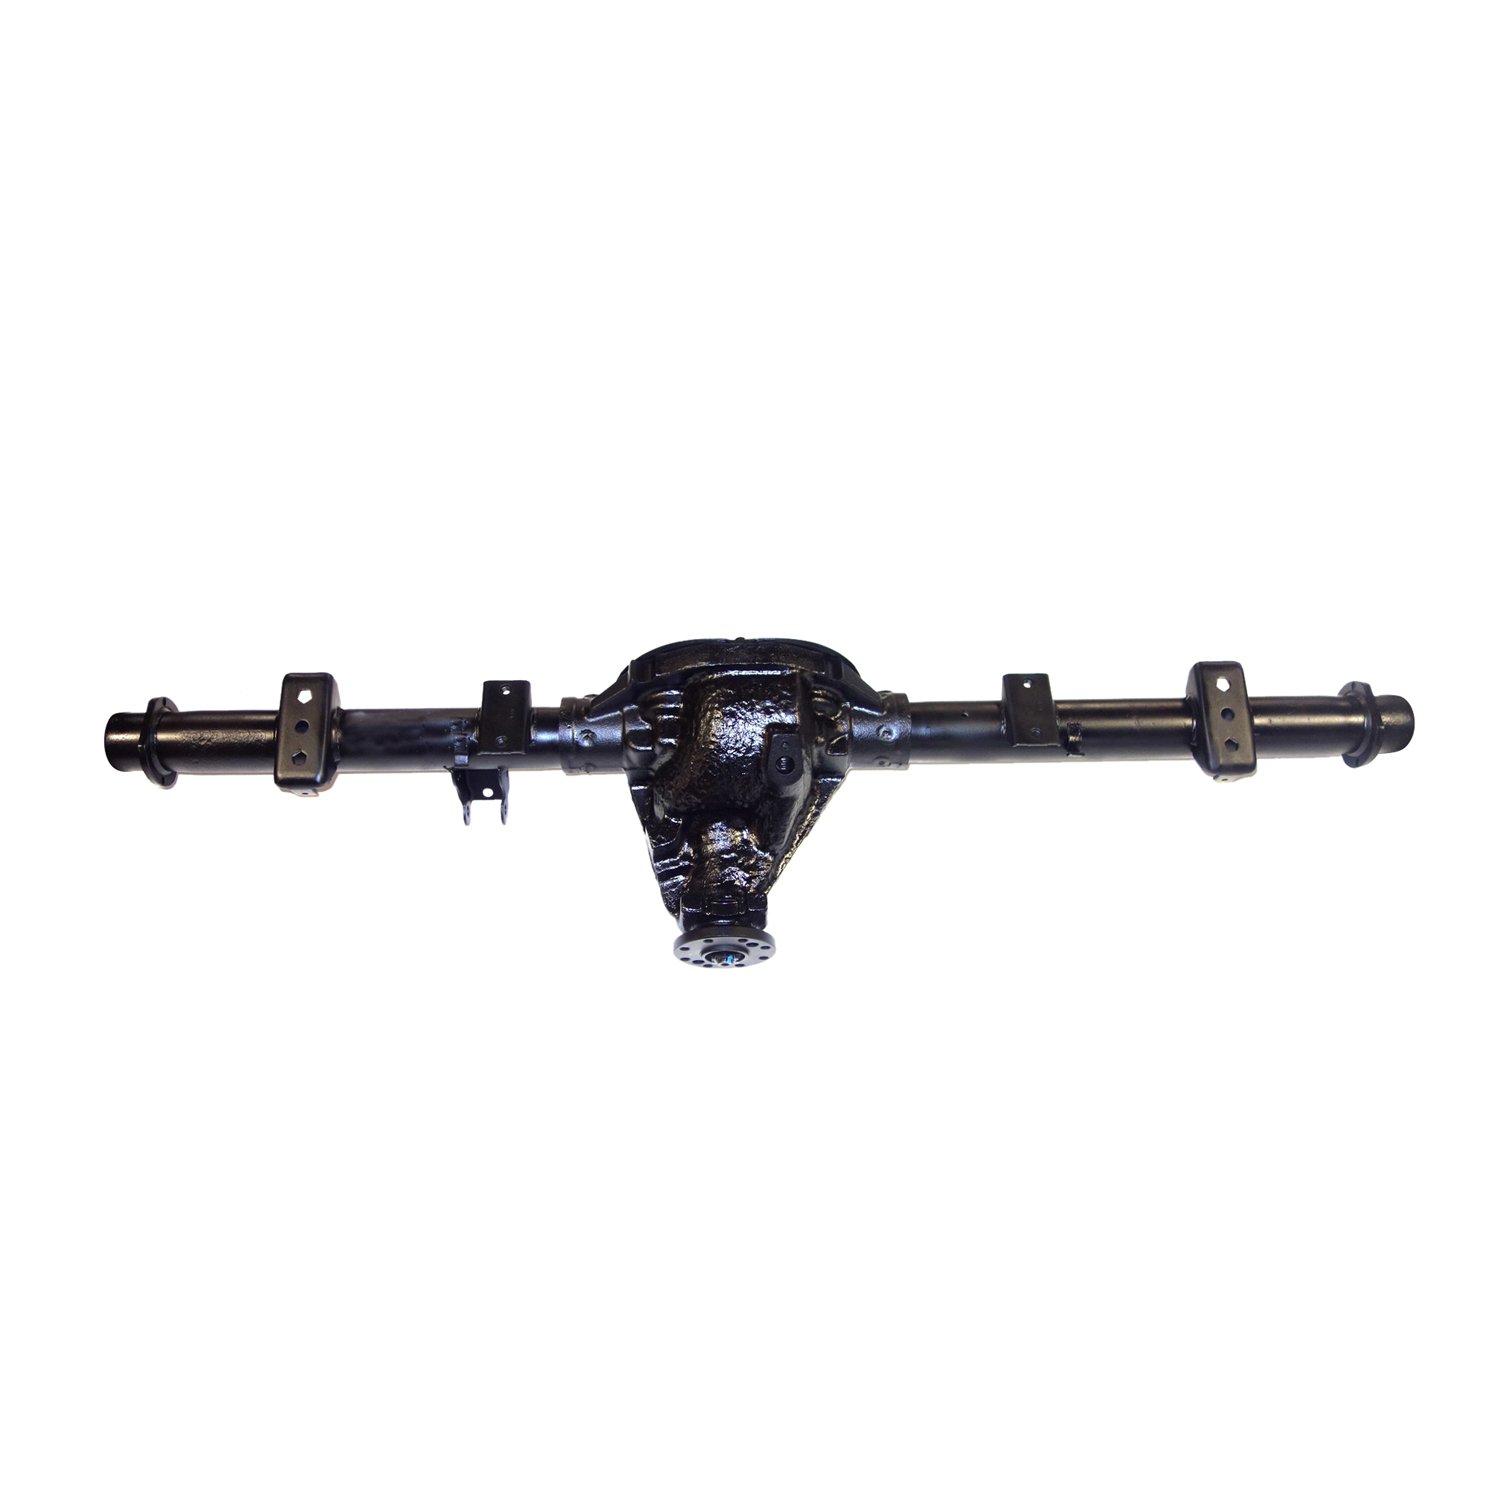 Remanufactured Complete Axle Assembly for Chy 8.25" 2003 Durango 3.92 , 4x4, Posi LSD